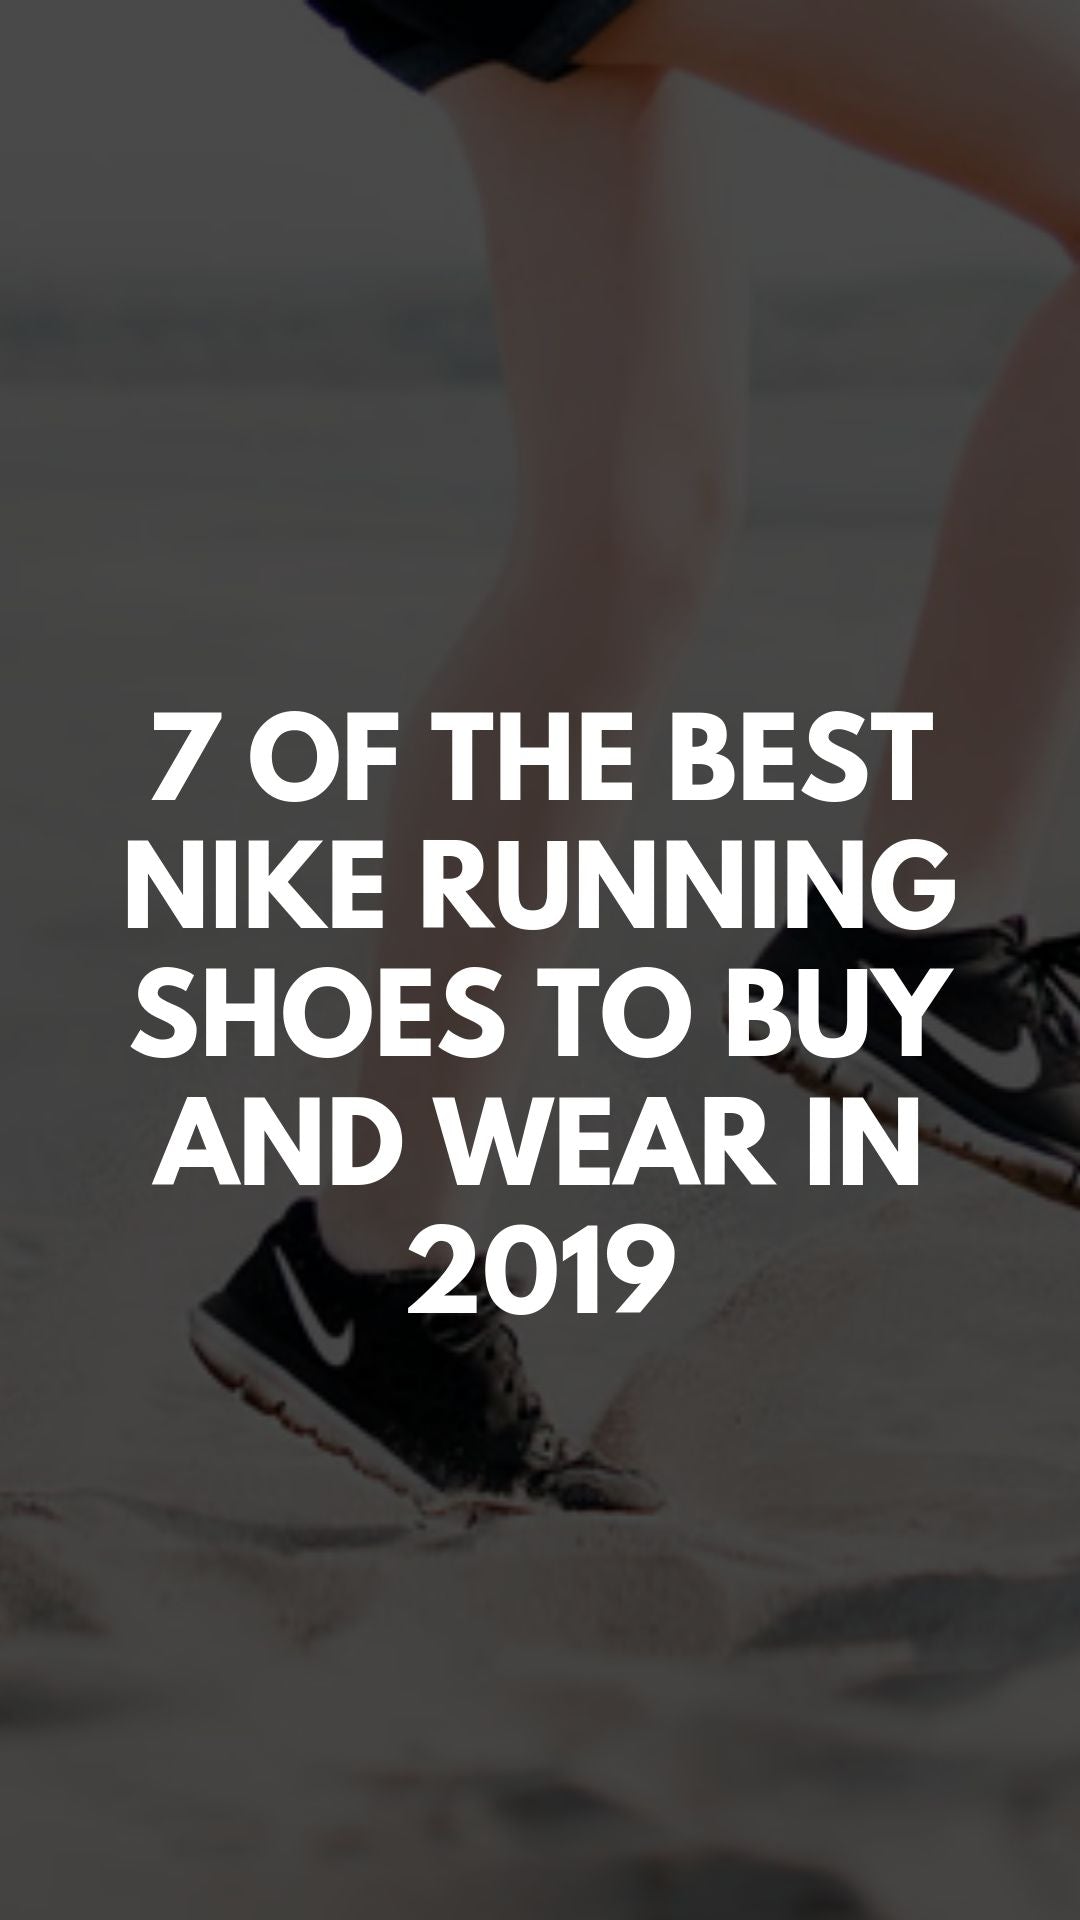 7 of the Best Nike Running Shoes to Buy and Wear in 2019